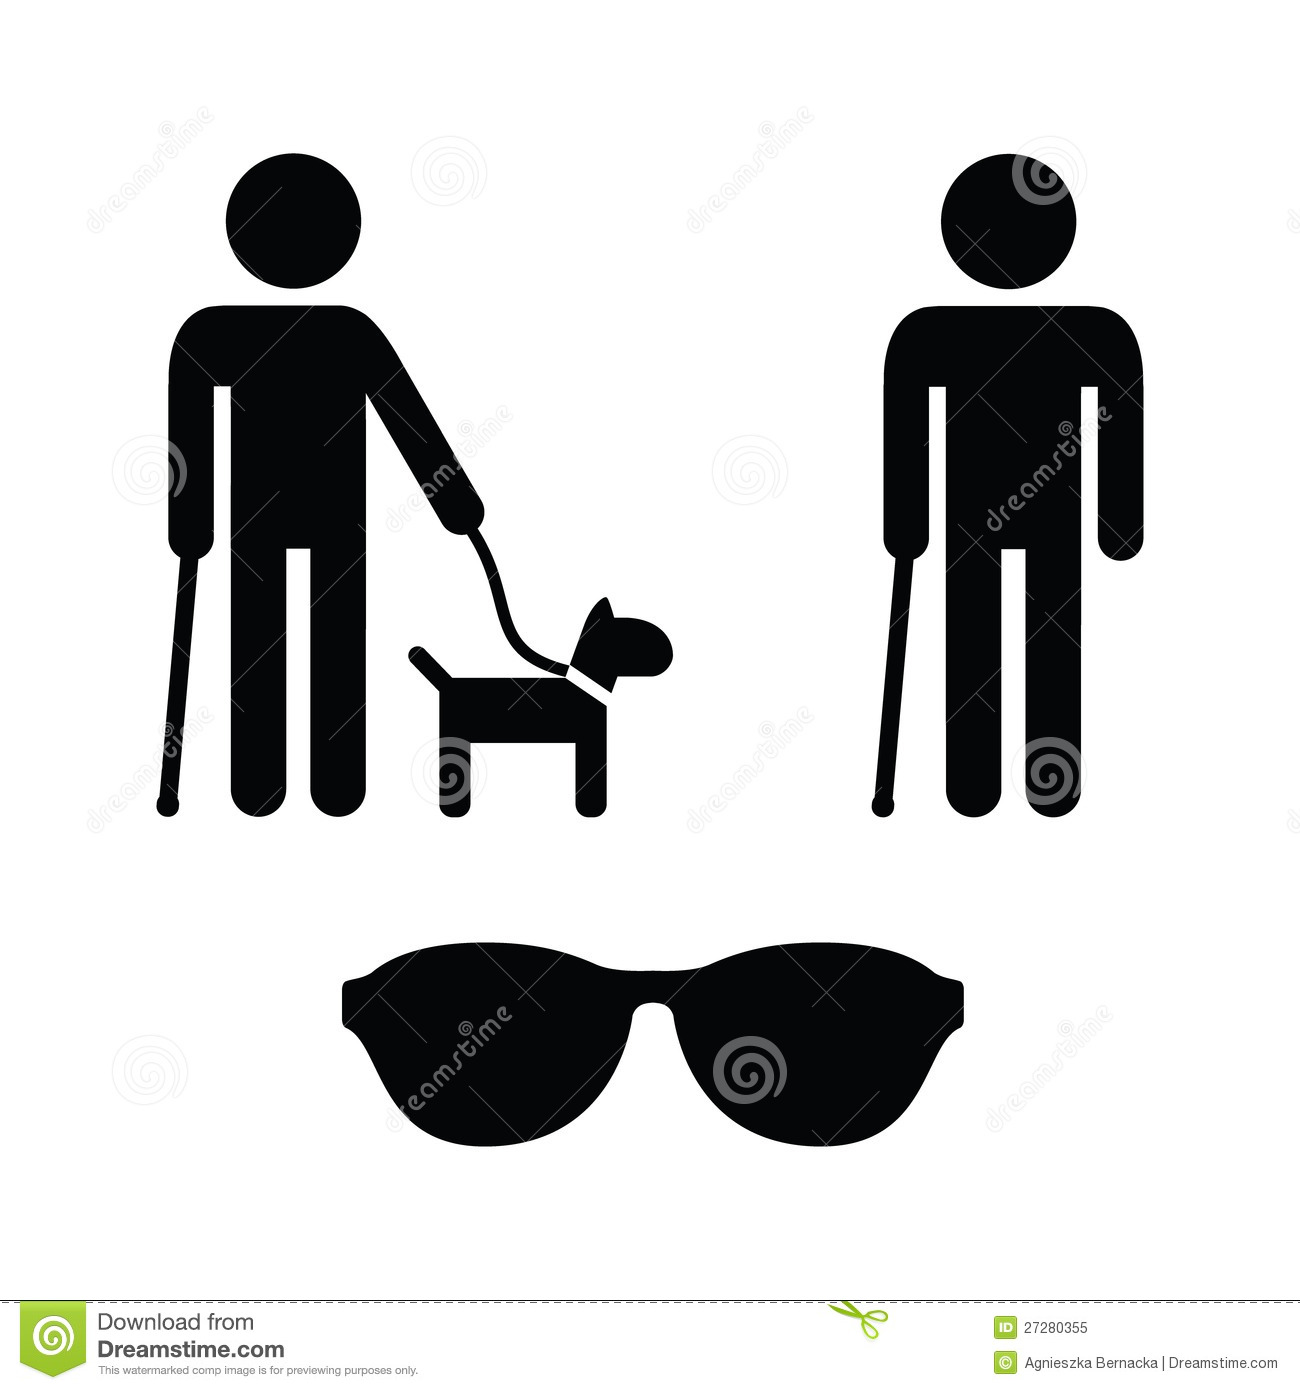     Similar Stock Images Of   Blind Man Icons Set   With Guide Dog Cane